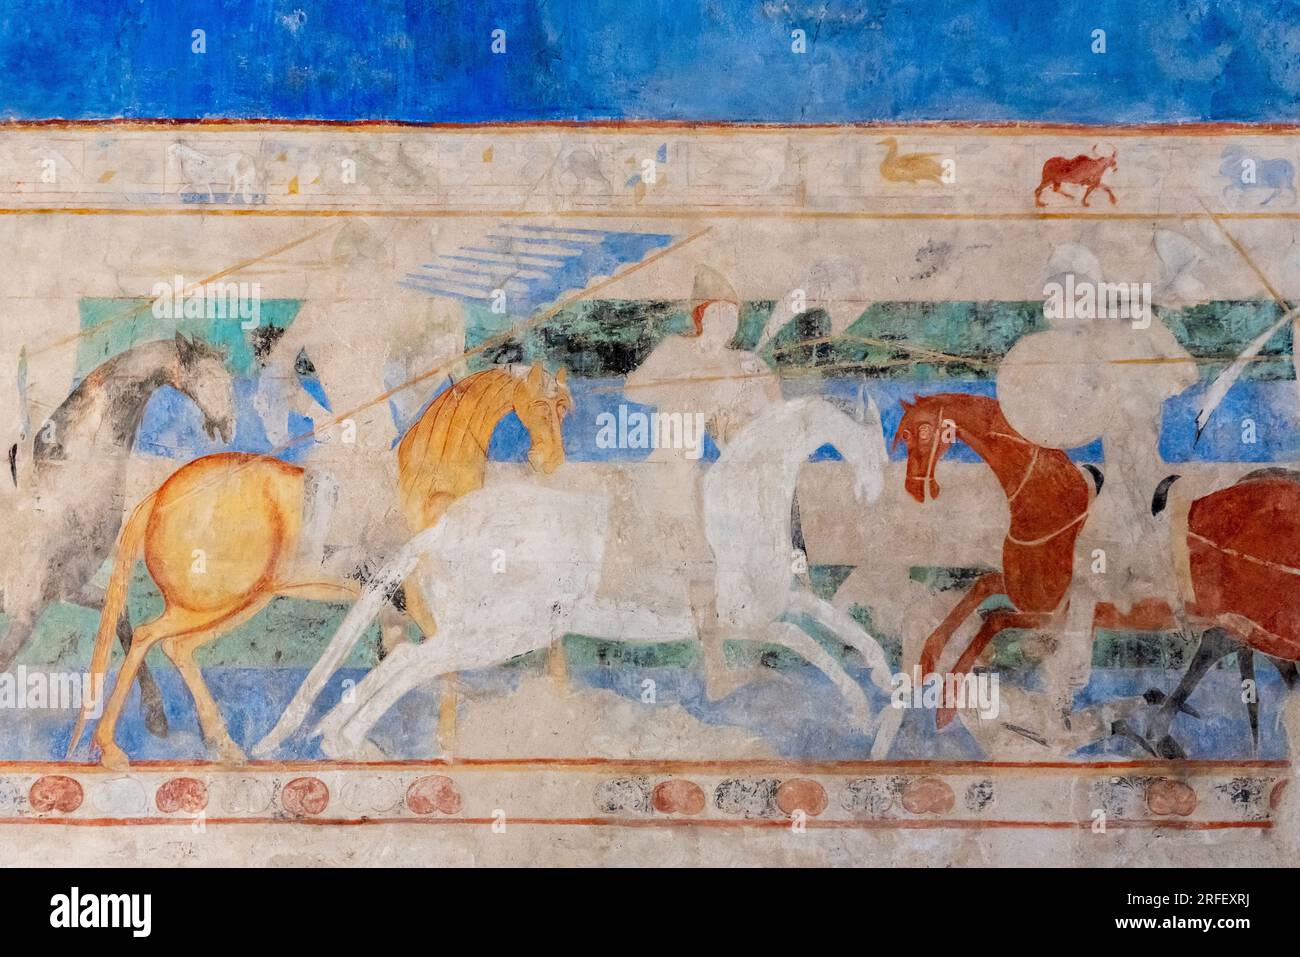 France, Aude, Carcassonne, medieval city listed as World Heritage by UNESCO, late 12th century wall painting depicting battles between Franks and Saracens Stock Photo